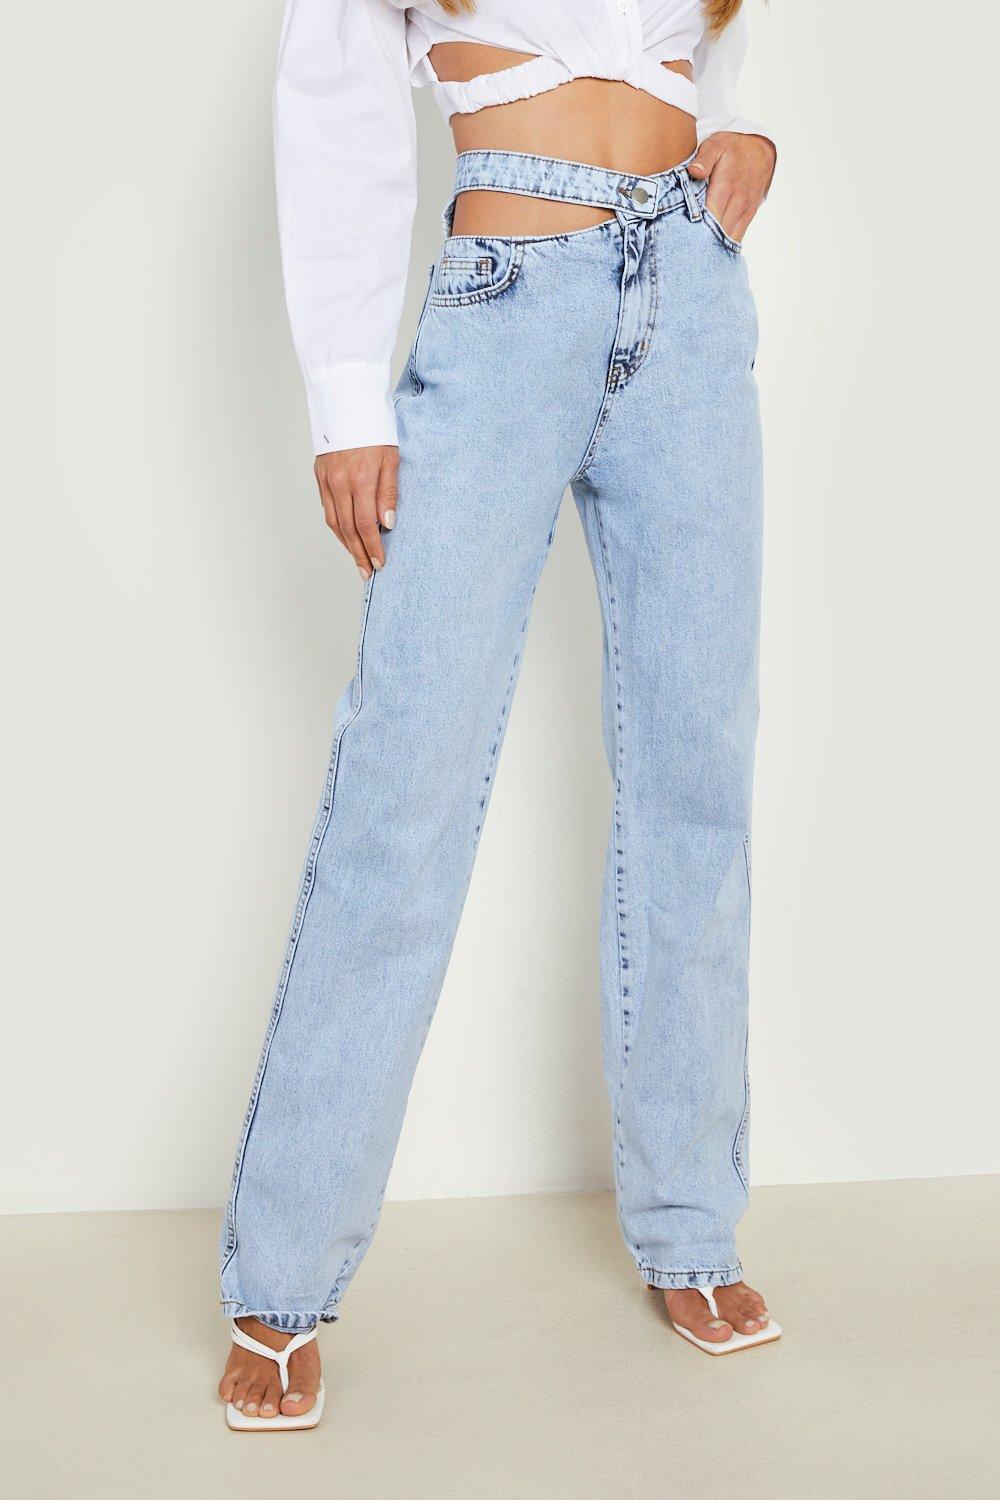 Who Cut It Out? Denim Trousers デニム | red-village.com